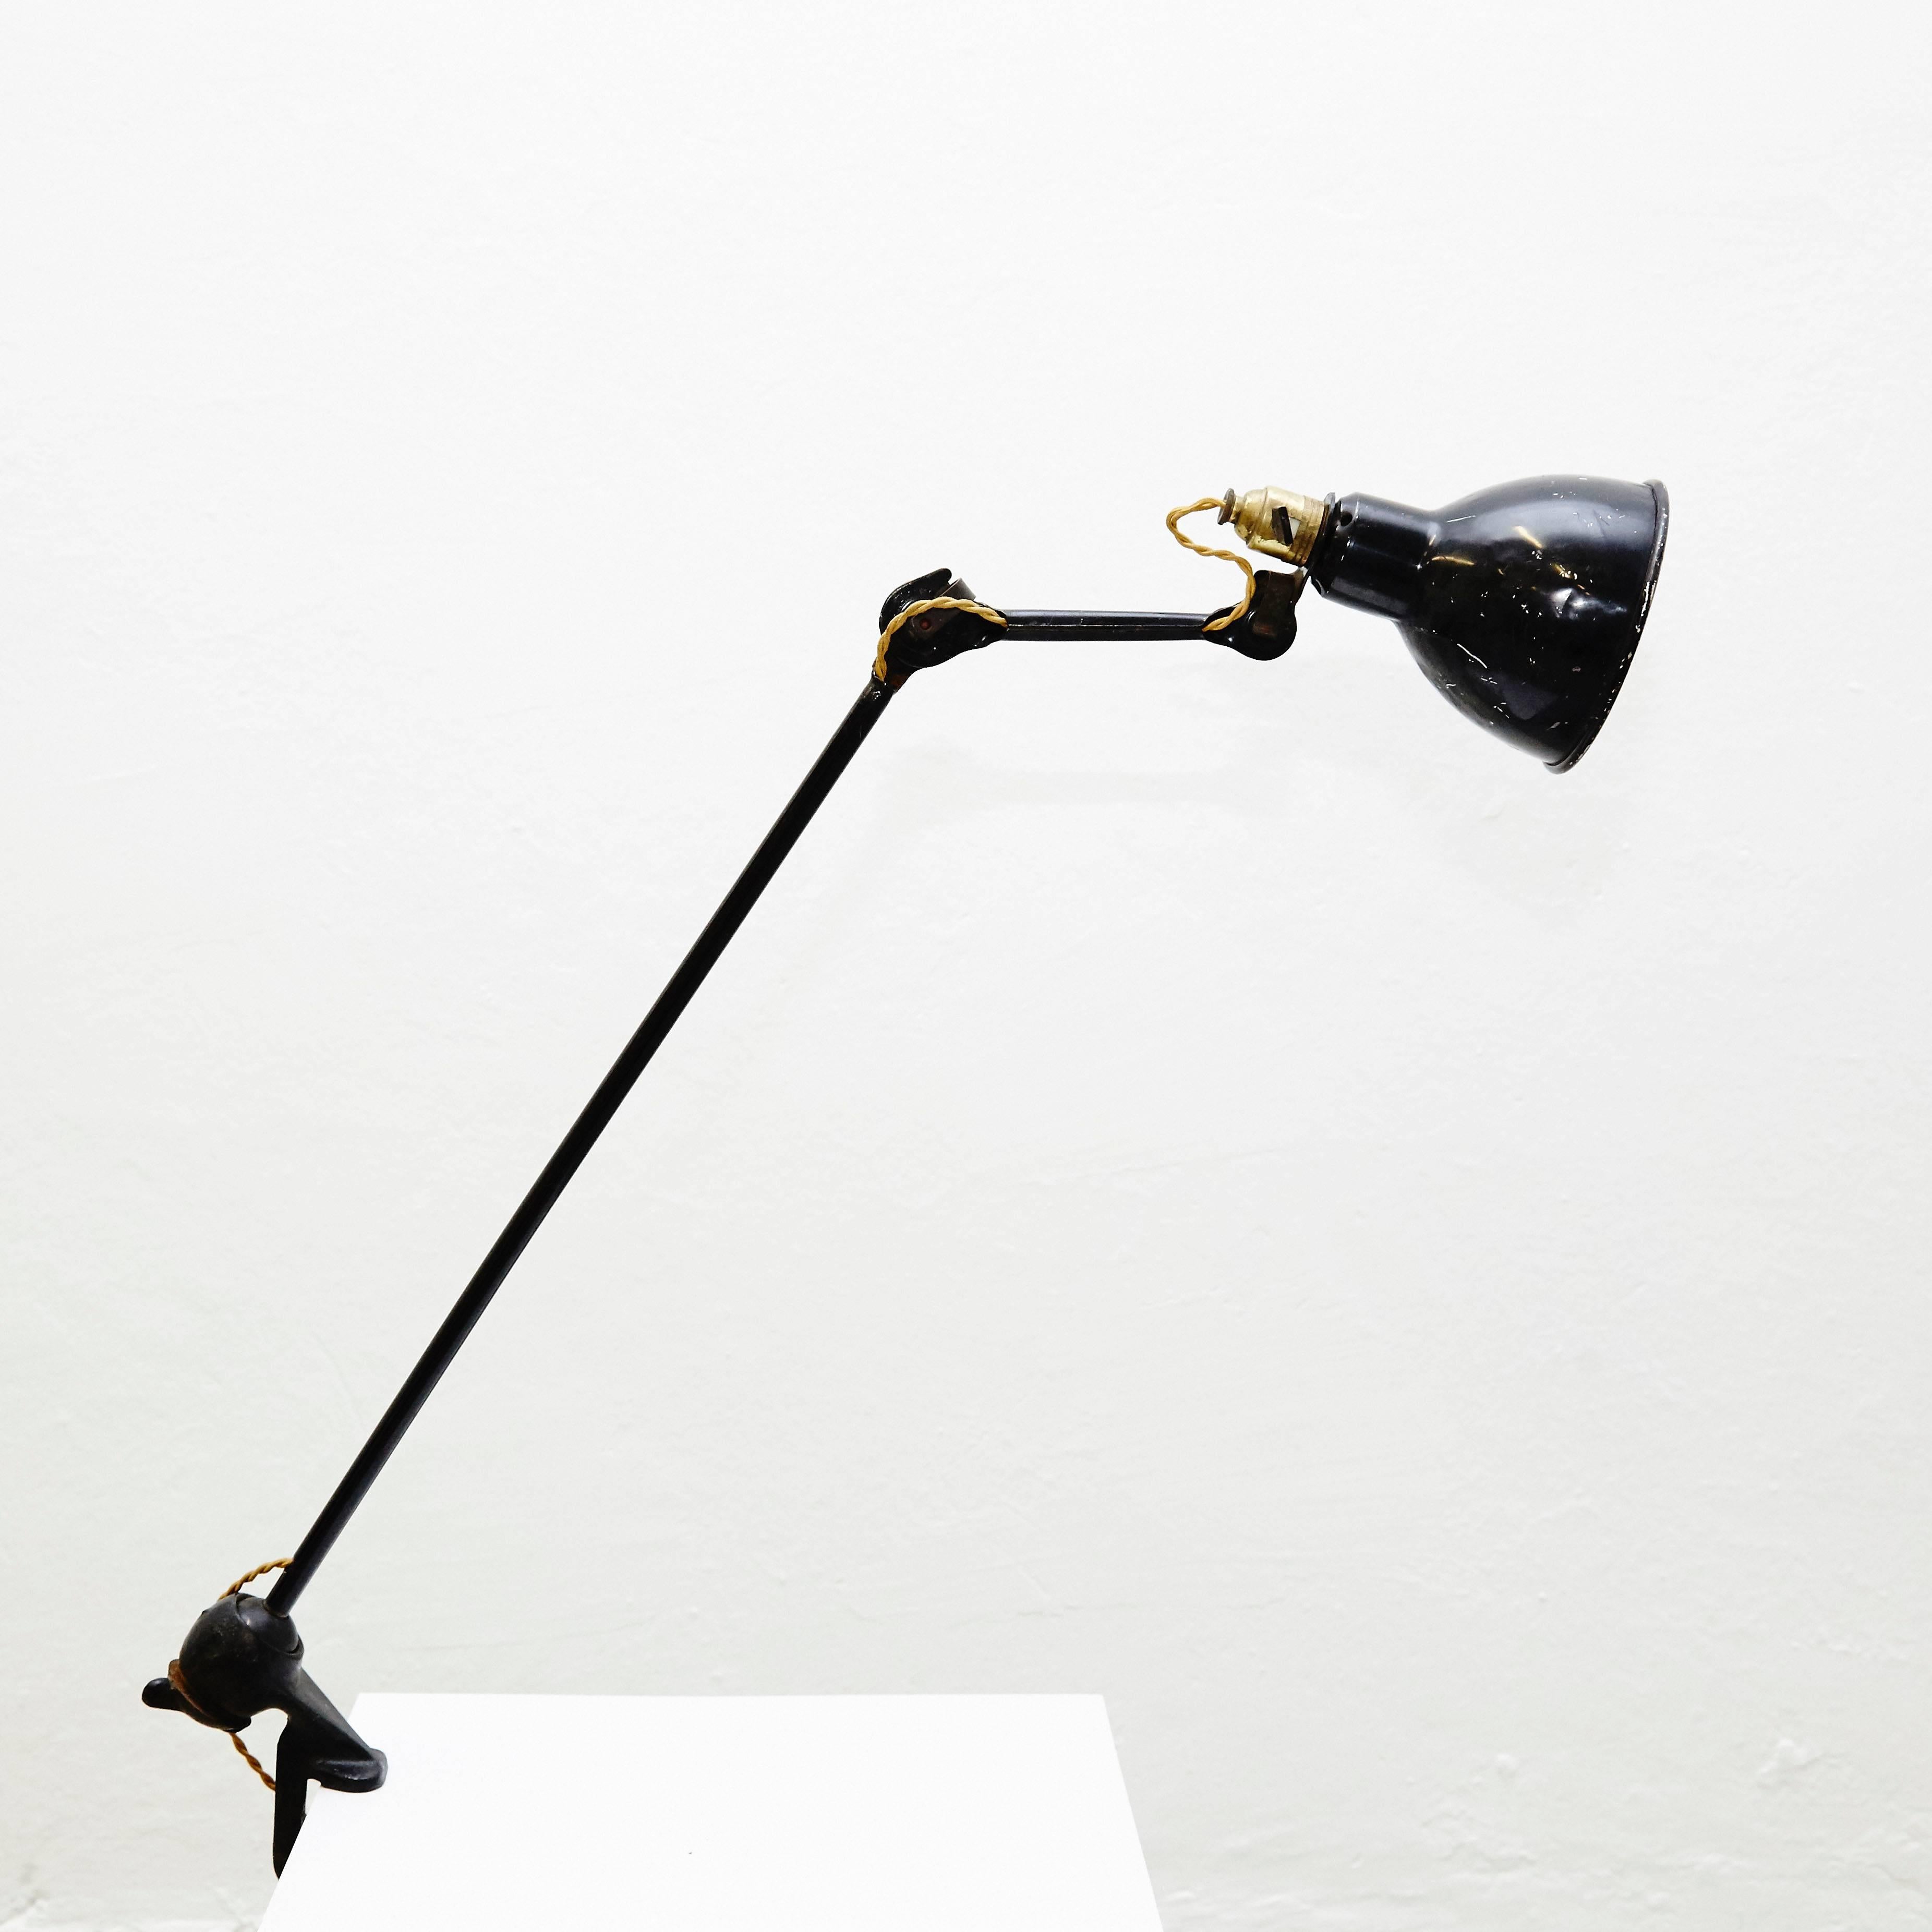 Table lamp designed by Bernard-Albin Gras.
Manufactured by Gras (France), circa 1930.
Aluminium and steel.

In good original condition, with minor wear consistent with age and use, preserving a beautiful patina.

In 1922 Bernard-Albin Gras